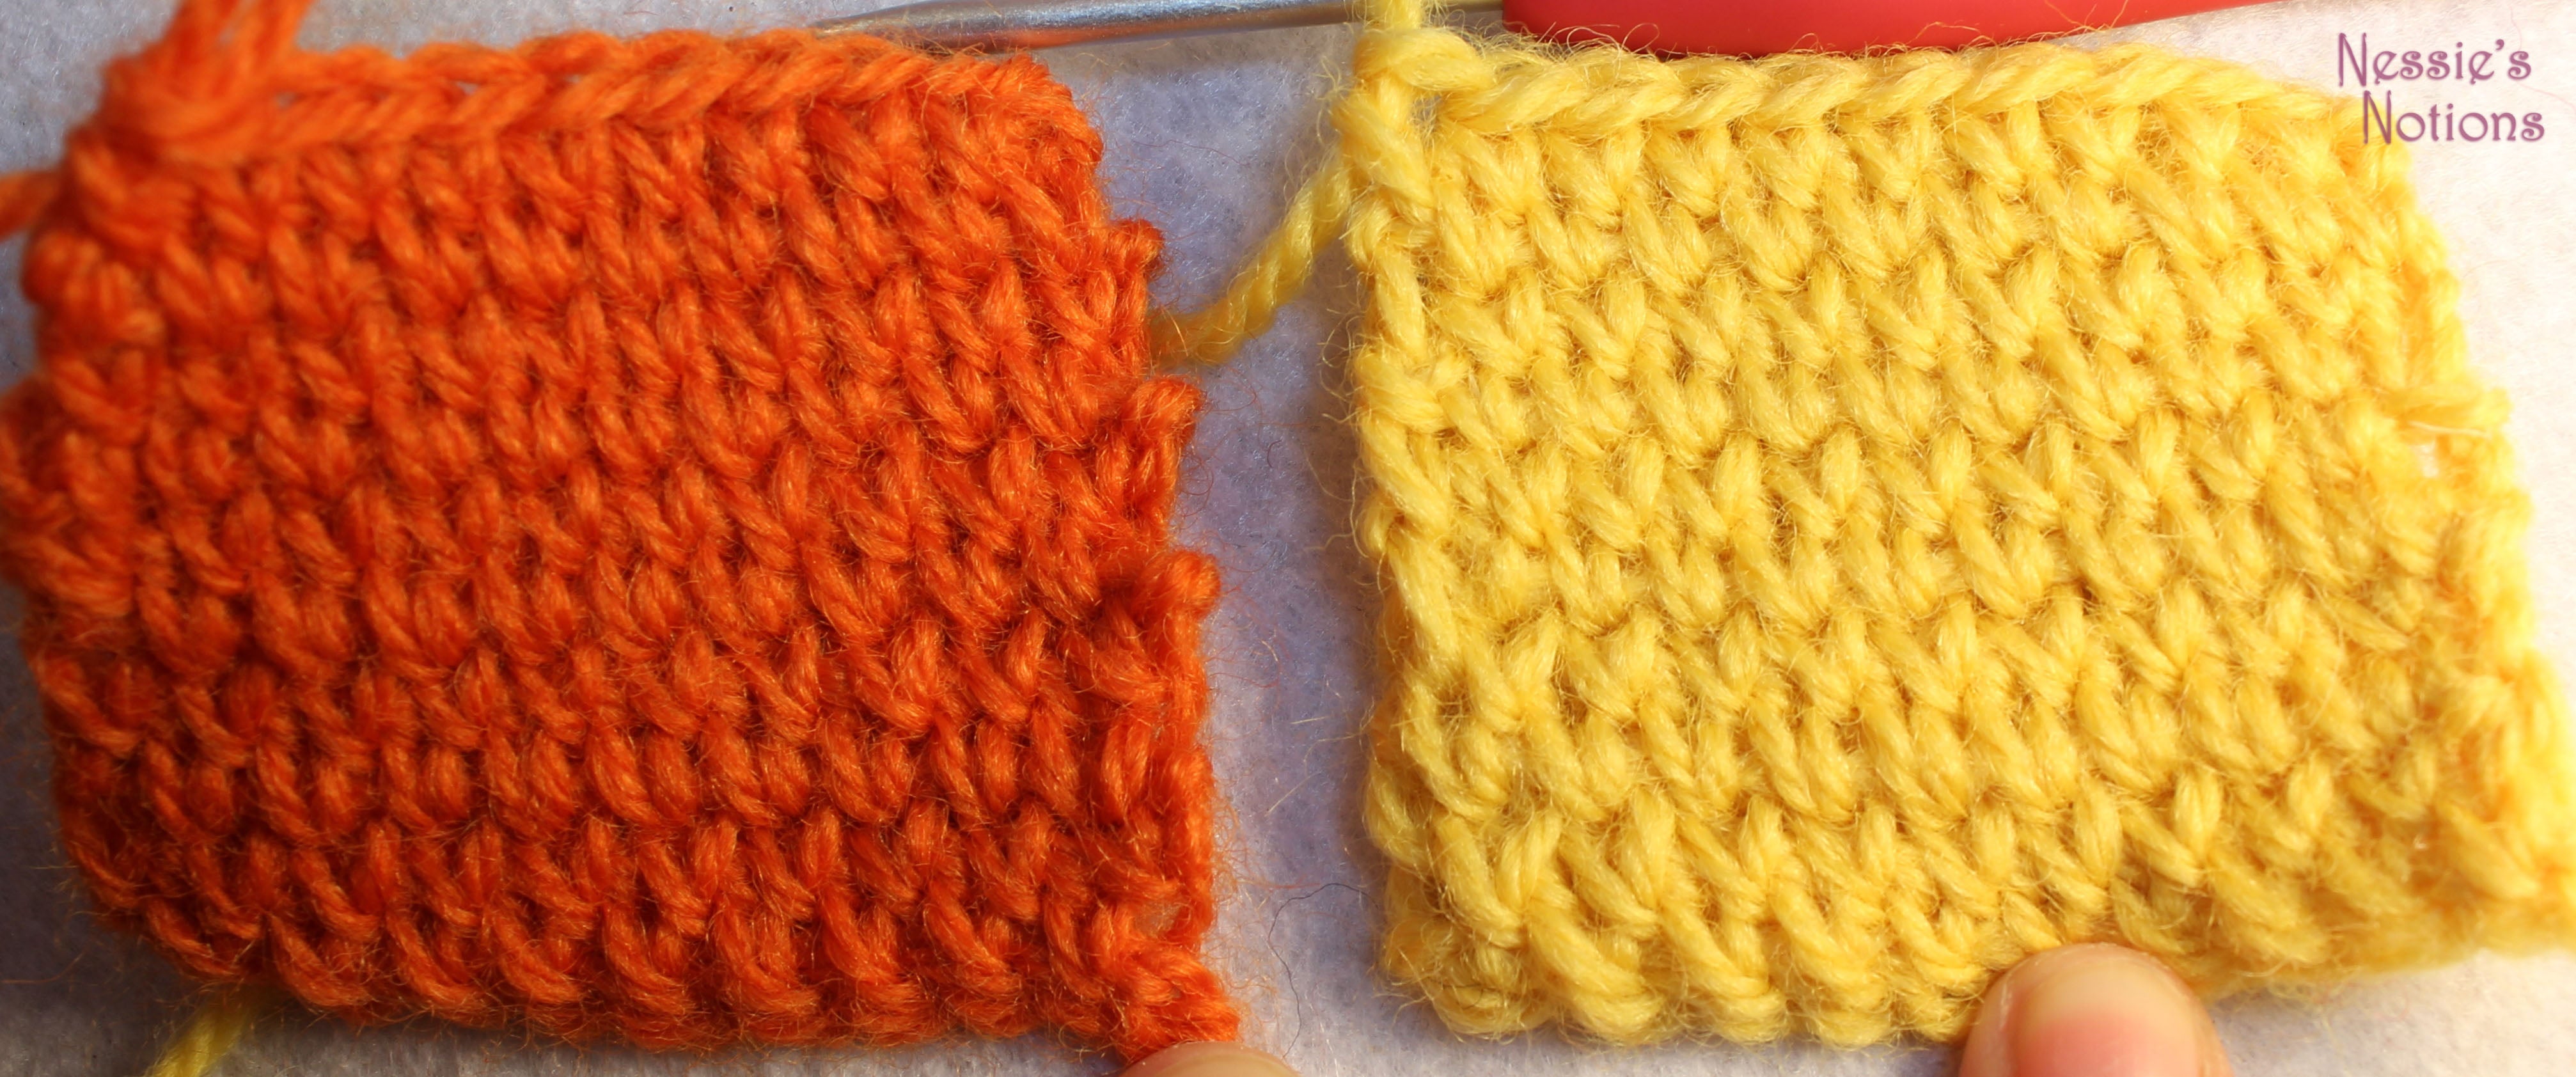 How to Crochet Waistcoat Stitch in Rounds 